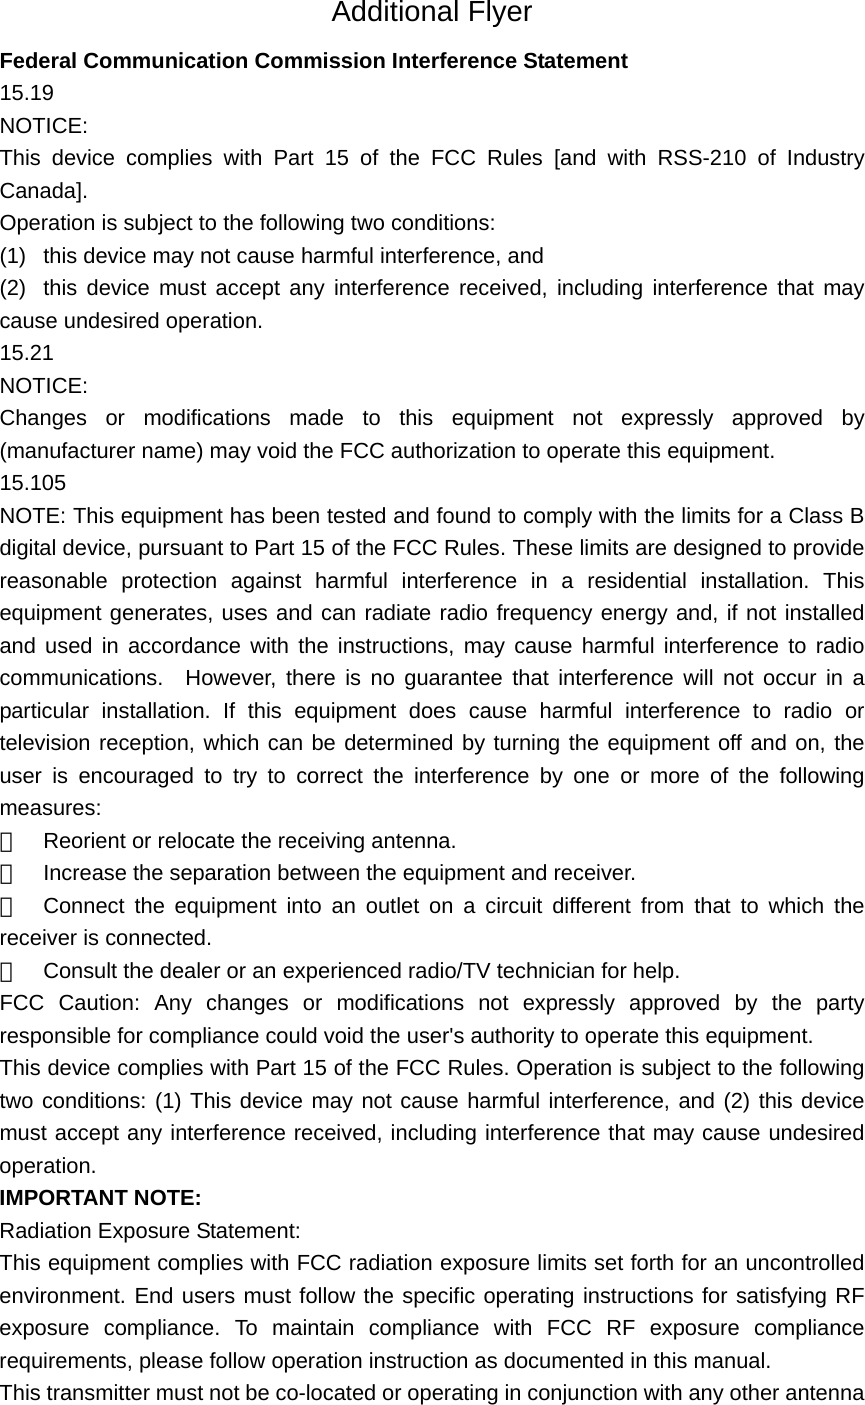  Additional Flyer Federal Communication Commission Interference Statement 15.19 NOTICE: This device complies with Part 15 of the FCC Rules [and with RSS-210 of Industry Canada]. Operation is subject to the following two conditions: (1)  this device may not cause harmful interference, and   (2)  this device must accept any interference received, including interference that may cause undesired operation. 15.21 NOTICE: Changes or modifications made to this equipment not expressly approved by (manufacturer name) may void the FCC authorization to operate this equipment. 15.105 NOTE: This equipment has been tested and found to comply with the limits for a Class B digital device, pursuant to Part 15 of the FCC Rules. These limits are designed to provide reasonable protection against harmful interference in a residential installation. This equipment generates, uses and can radiate radio frequency energy and, if not installed and used in accordance with the instructions, may cause harmful interference to radio communications.  However, there is no guarantee that interference will not occur in a particular installation. If this equipment does cause harmful interference to radio or television reception, which can be determined by turning the equipment off and on, the user is encouraged to try to correct the interference by one or more of the following measures: 　  Reorient or relocate the receiving antenna. 　  Increase the separation between the equipment and receiver. 　  Connect the equipment into an outlet on a circuit different from that to which the receiver is connected. 　  Consult the dealer or an experienced radio/TV technician for help. FCC Caution: Any changes or modifications not expressly approved by the party responsible for compliance could void the user&apos;s authority to operate this equipment. This device complies with Part 15 of the FCC Rules. Operation is subject to the following two conditions: (1) This device may not cause harmful interference, and (2) this device must accept any interference received, including interference that may cause undesired operation. IMPORTANT NOTE: Radiation Exposure Statement: This equipment complies with FCC radiation exposure limits set forth for an uncontrolled environment. End users must follow the specific operating instructions for satisfying RF exposure compliance. To maintain compliance with FCC RF exposure compliance requirements, please follow operation instruction as documented in this manual.   This transmitter must not be co-located or operating in conjunction with any other antenna 